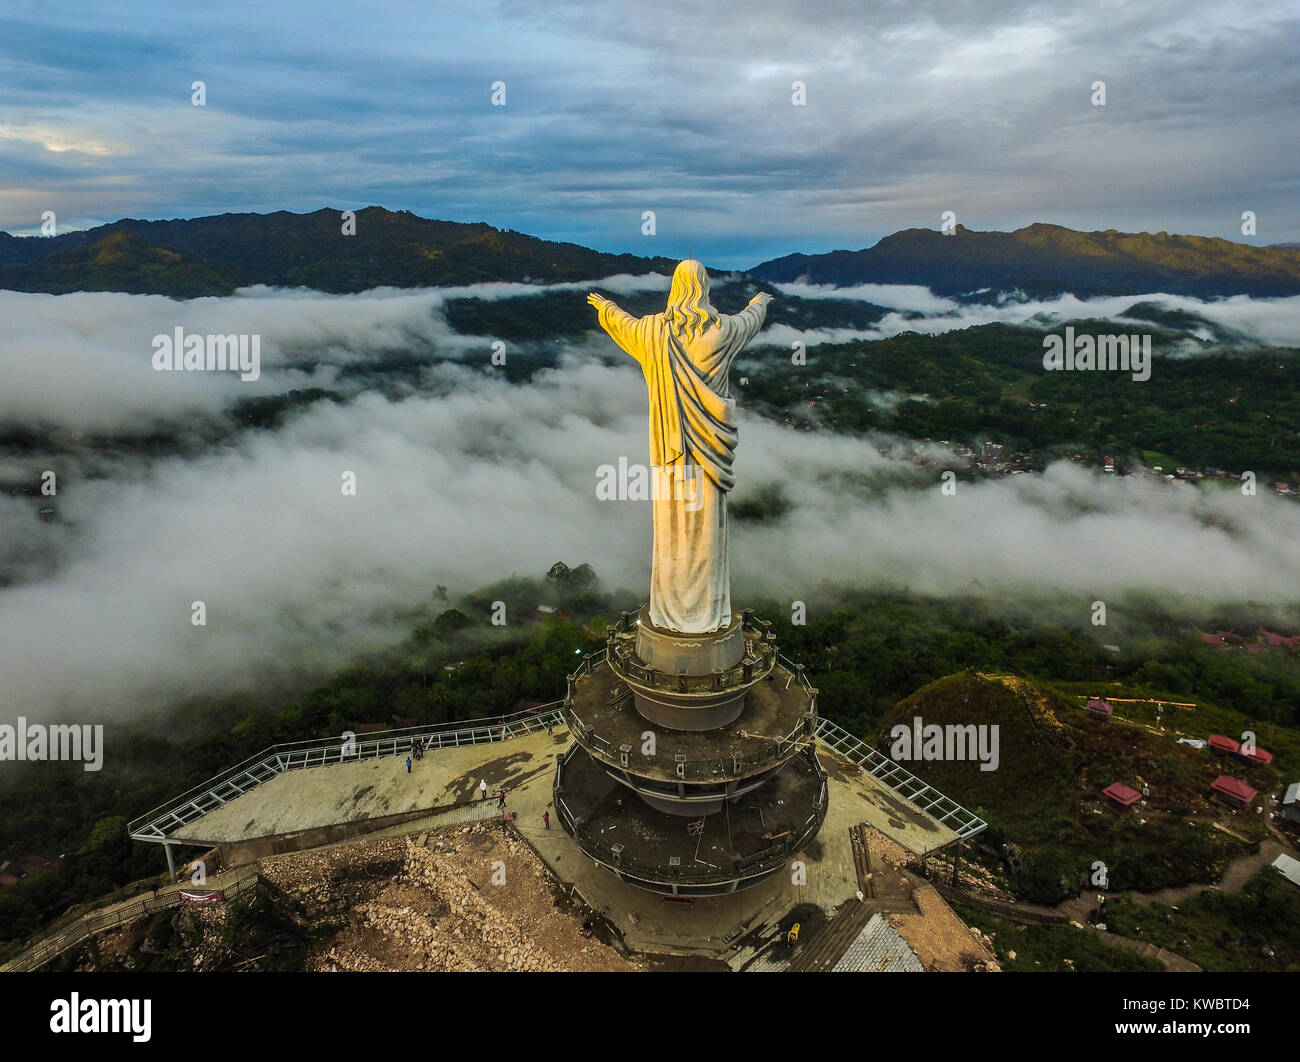 Statue of Jesus Christ at Buntu Burake Hill, Tana Toraja - South Sulawesi. The statue facing to the city of Makale, taken exactly during the sunrise. Stock Photo